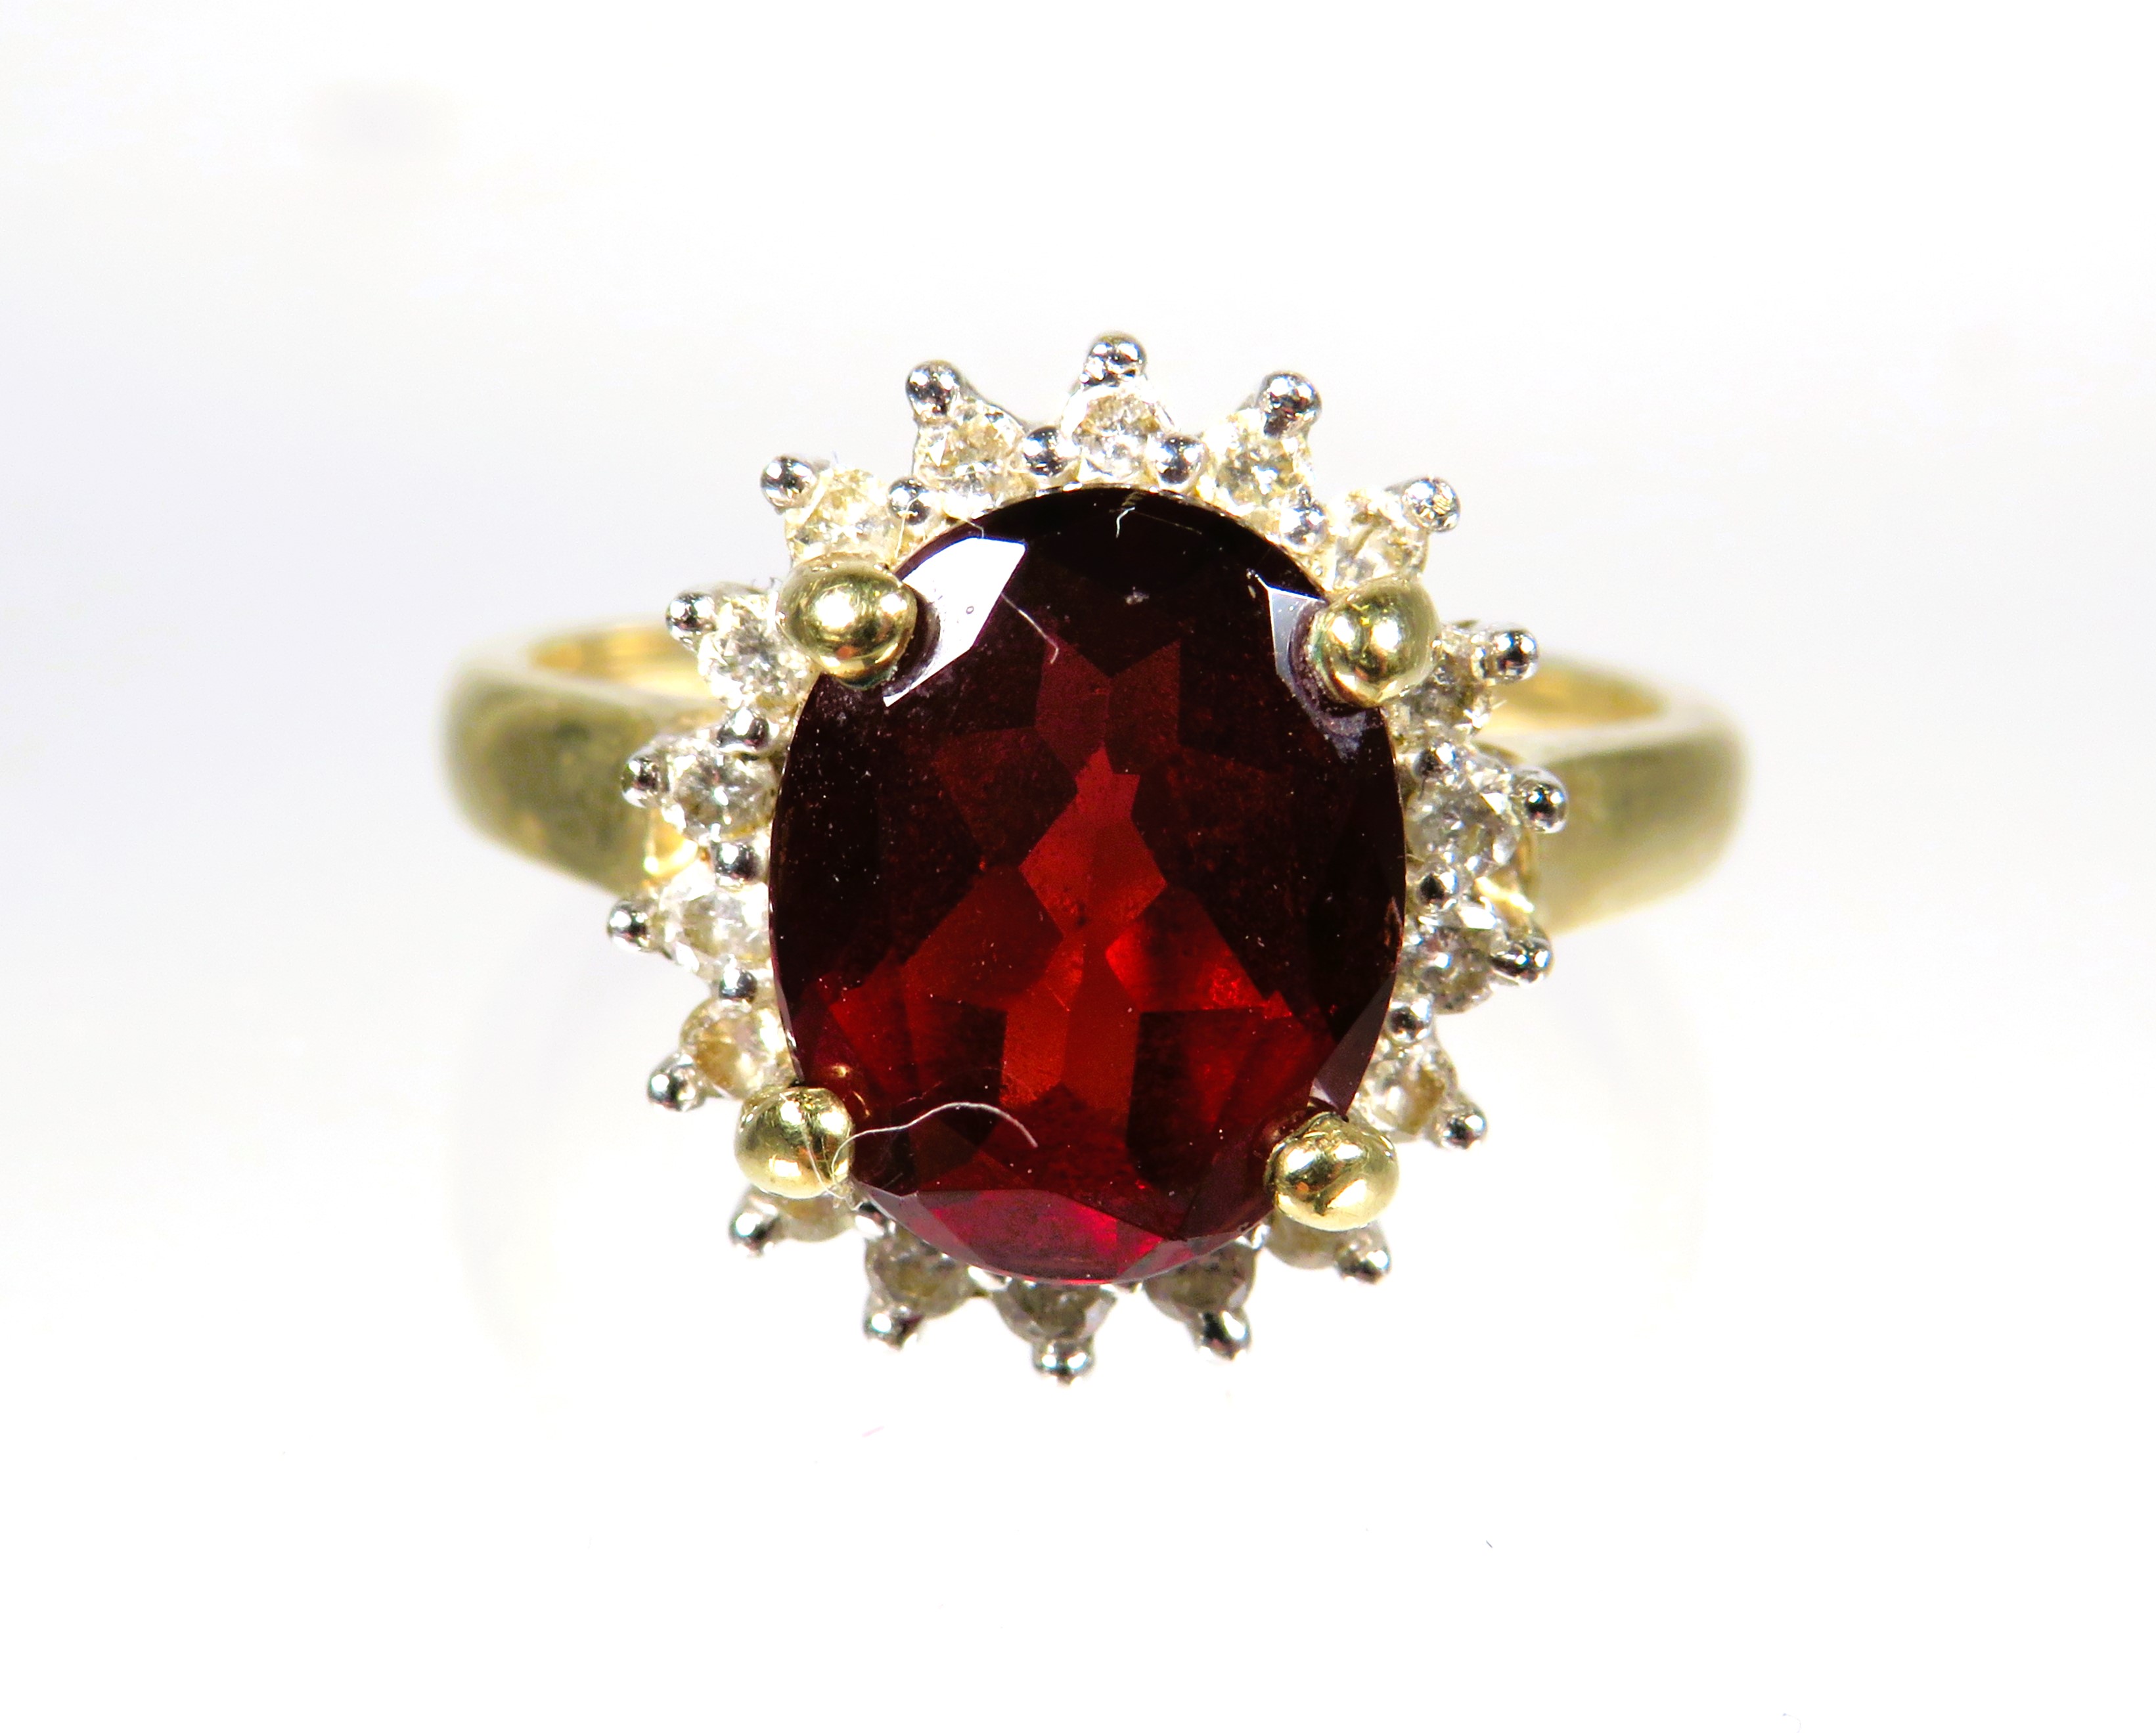 9ct Yellow Gold ring set with a large Oval Garnet which measures approx 10 x 8 mm with Diamond Surro